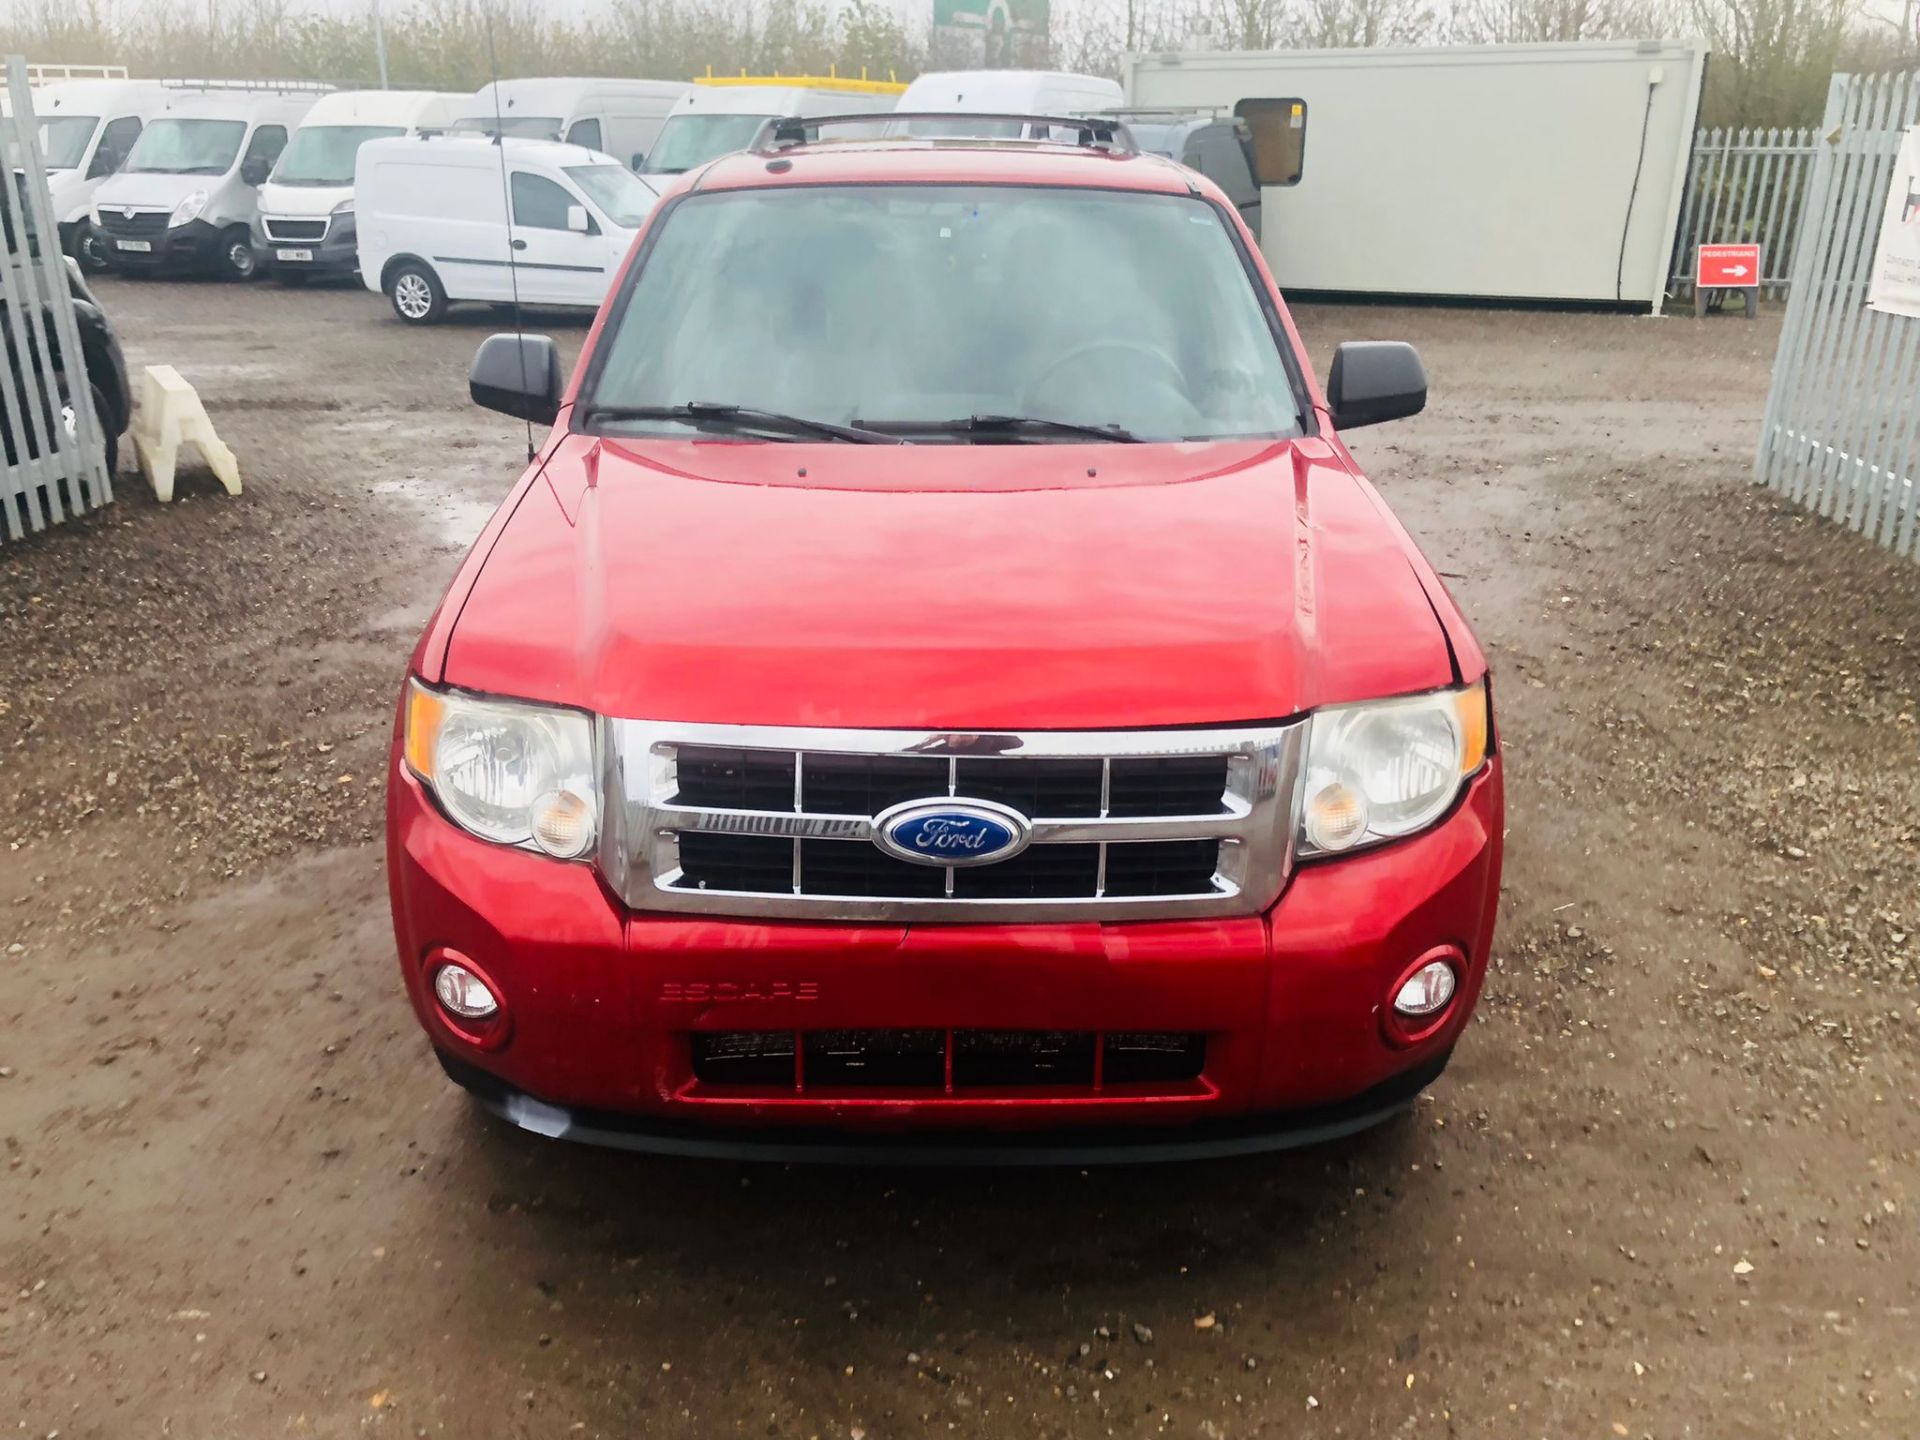 ** ON SALE ** Ford Escape XLT 3.0L V6 ' 2011 Year ' Auto - A/C - Winter Pack - Left hand Drive - Image 3 of 21